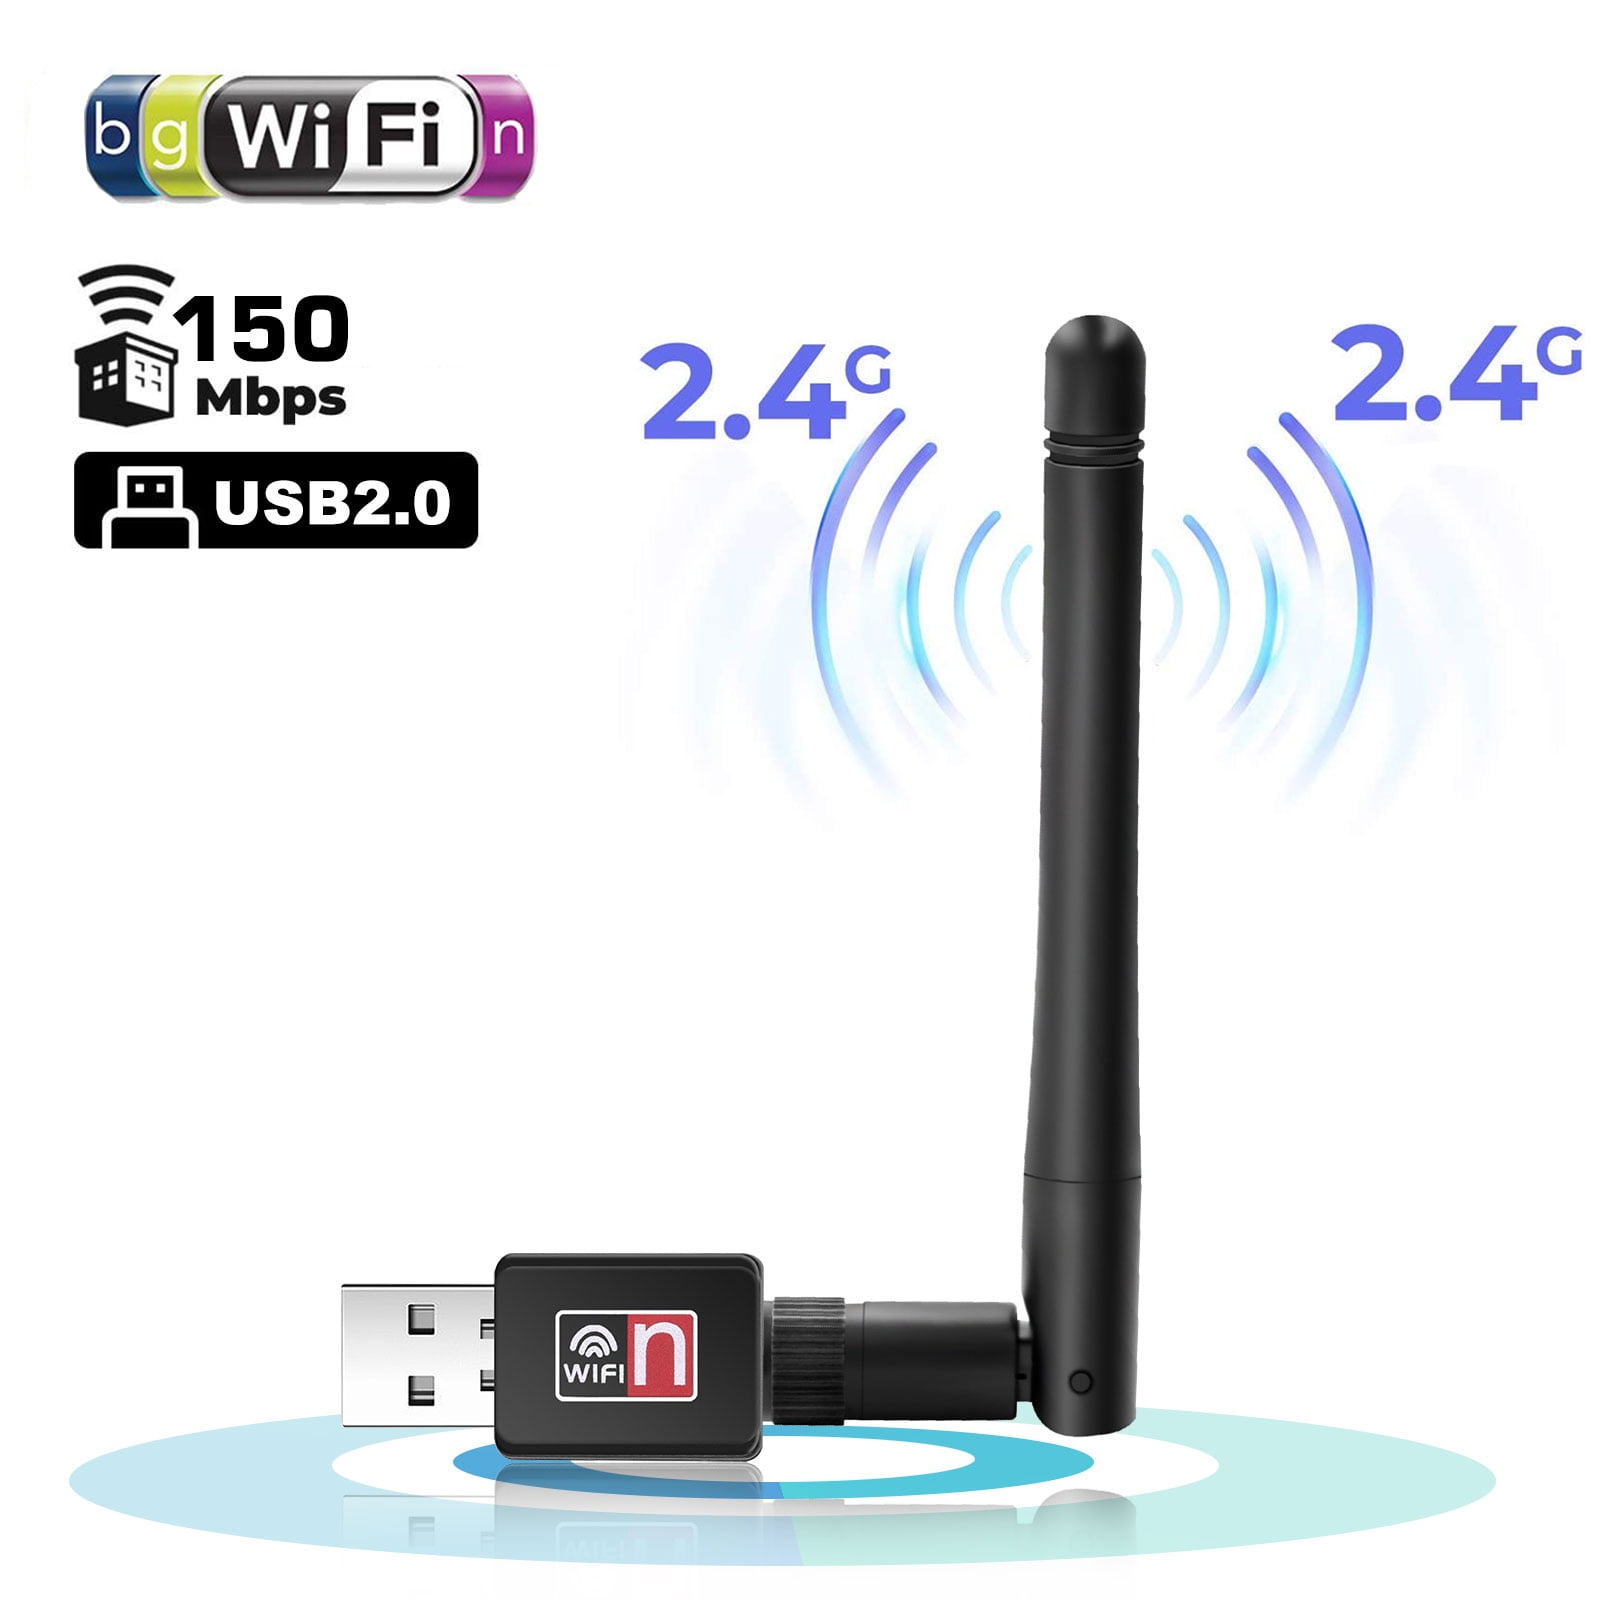 USB WiFi Adapter for PC, EEEkit Wireless Network Adapter with High Gain Antenna, Dual-Band 2.4G/5GHz Wi-Fi Dongle Compatible with Desktop, Laptop, Windows, Mac OS, Linux - Walmart.com